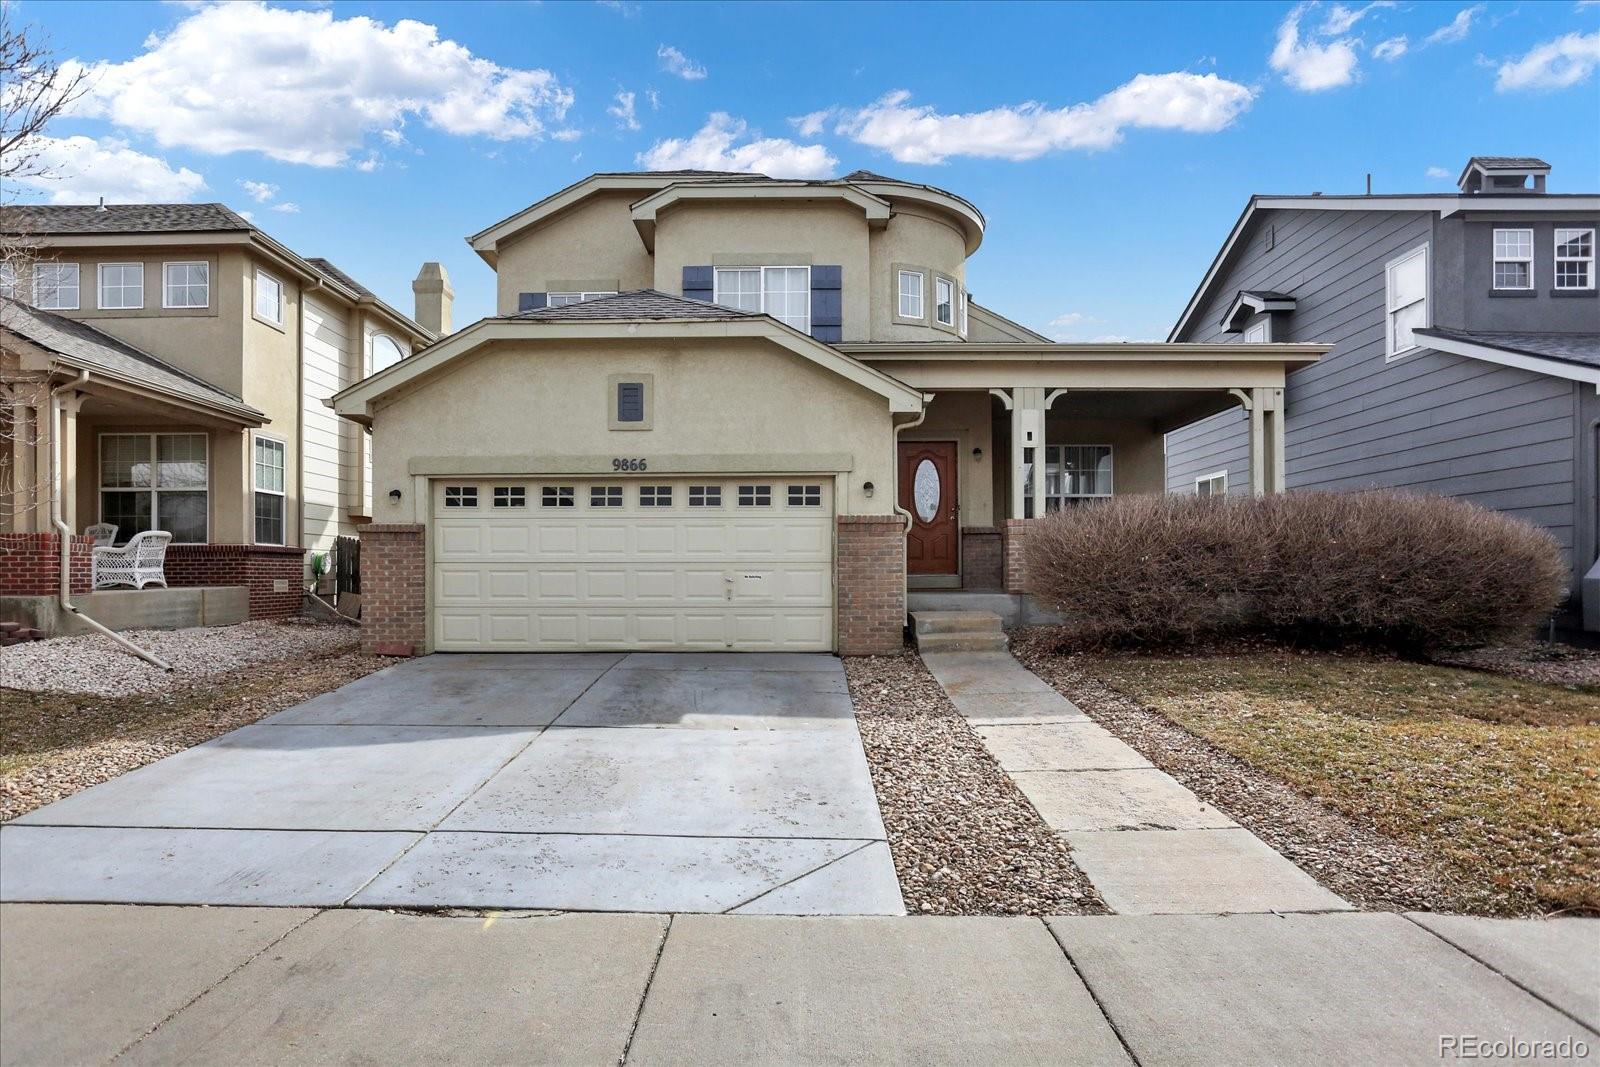 9866 e 112th place, Commerce City sold home. Closed on 2024-04-26 for $479,000.